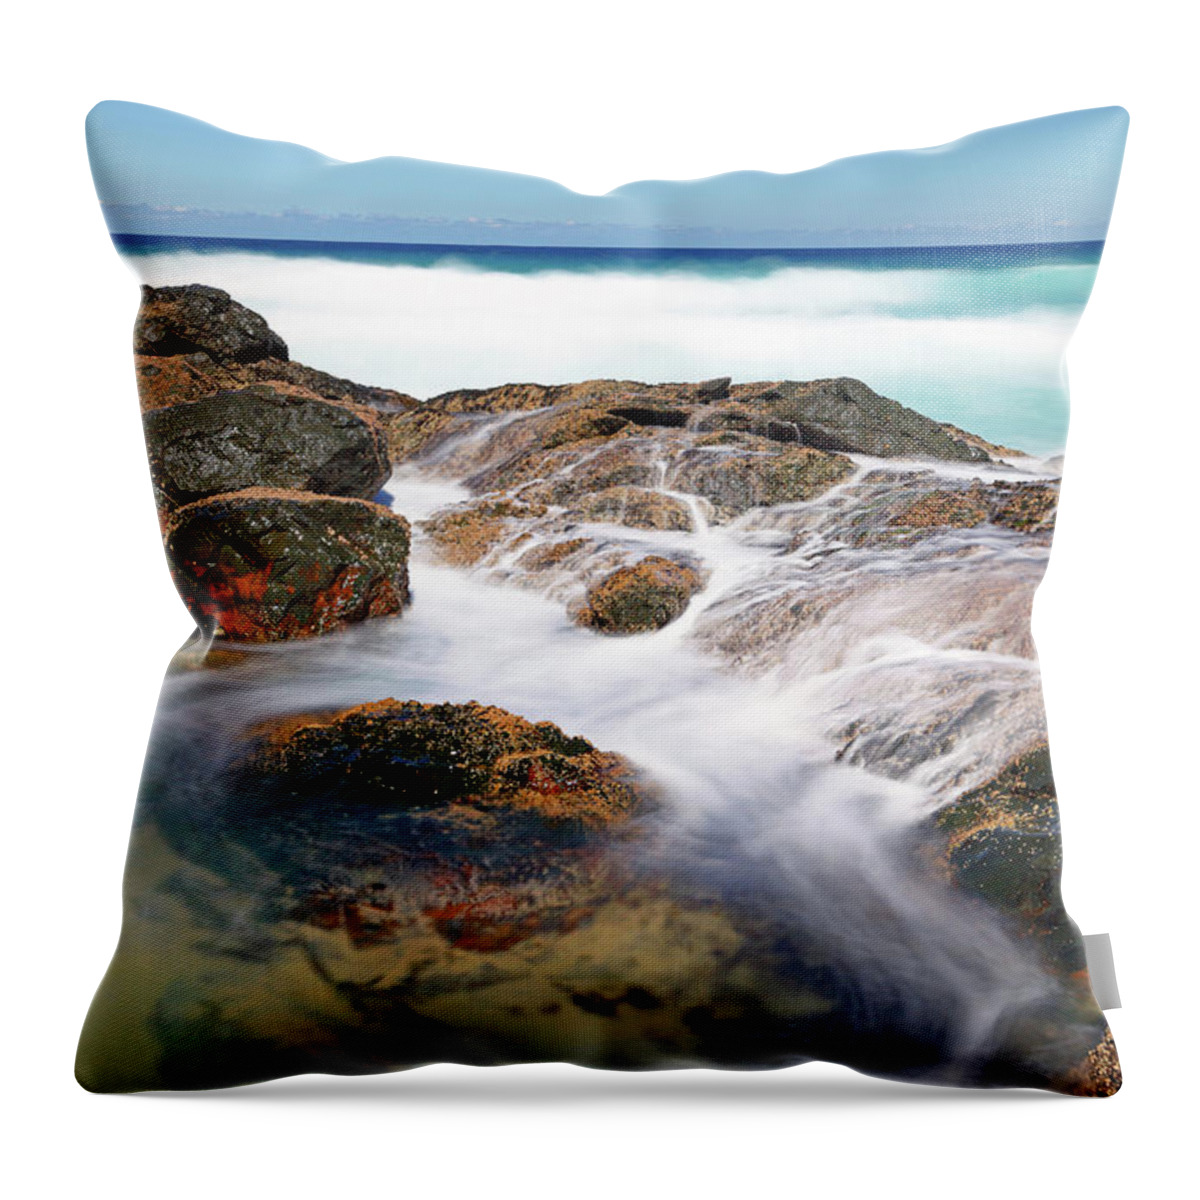 Rock Throw Pillow featuring the photograph Rock Pool by Nicholas Blackwell